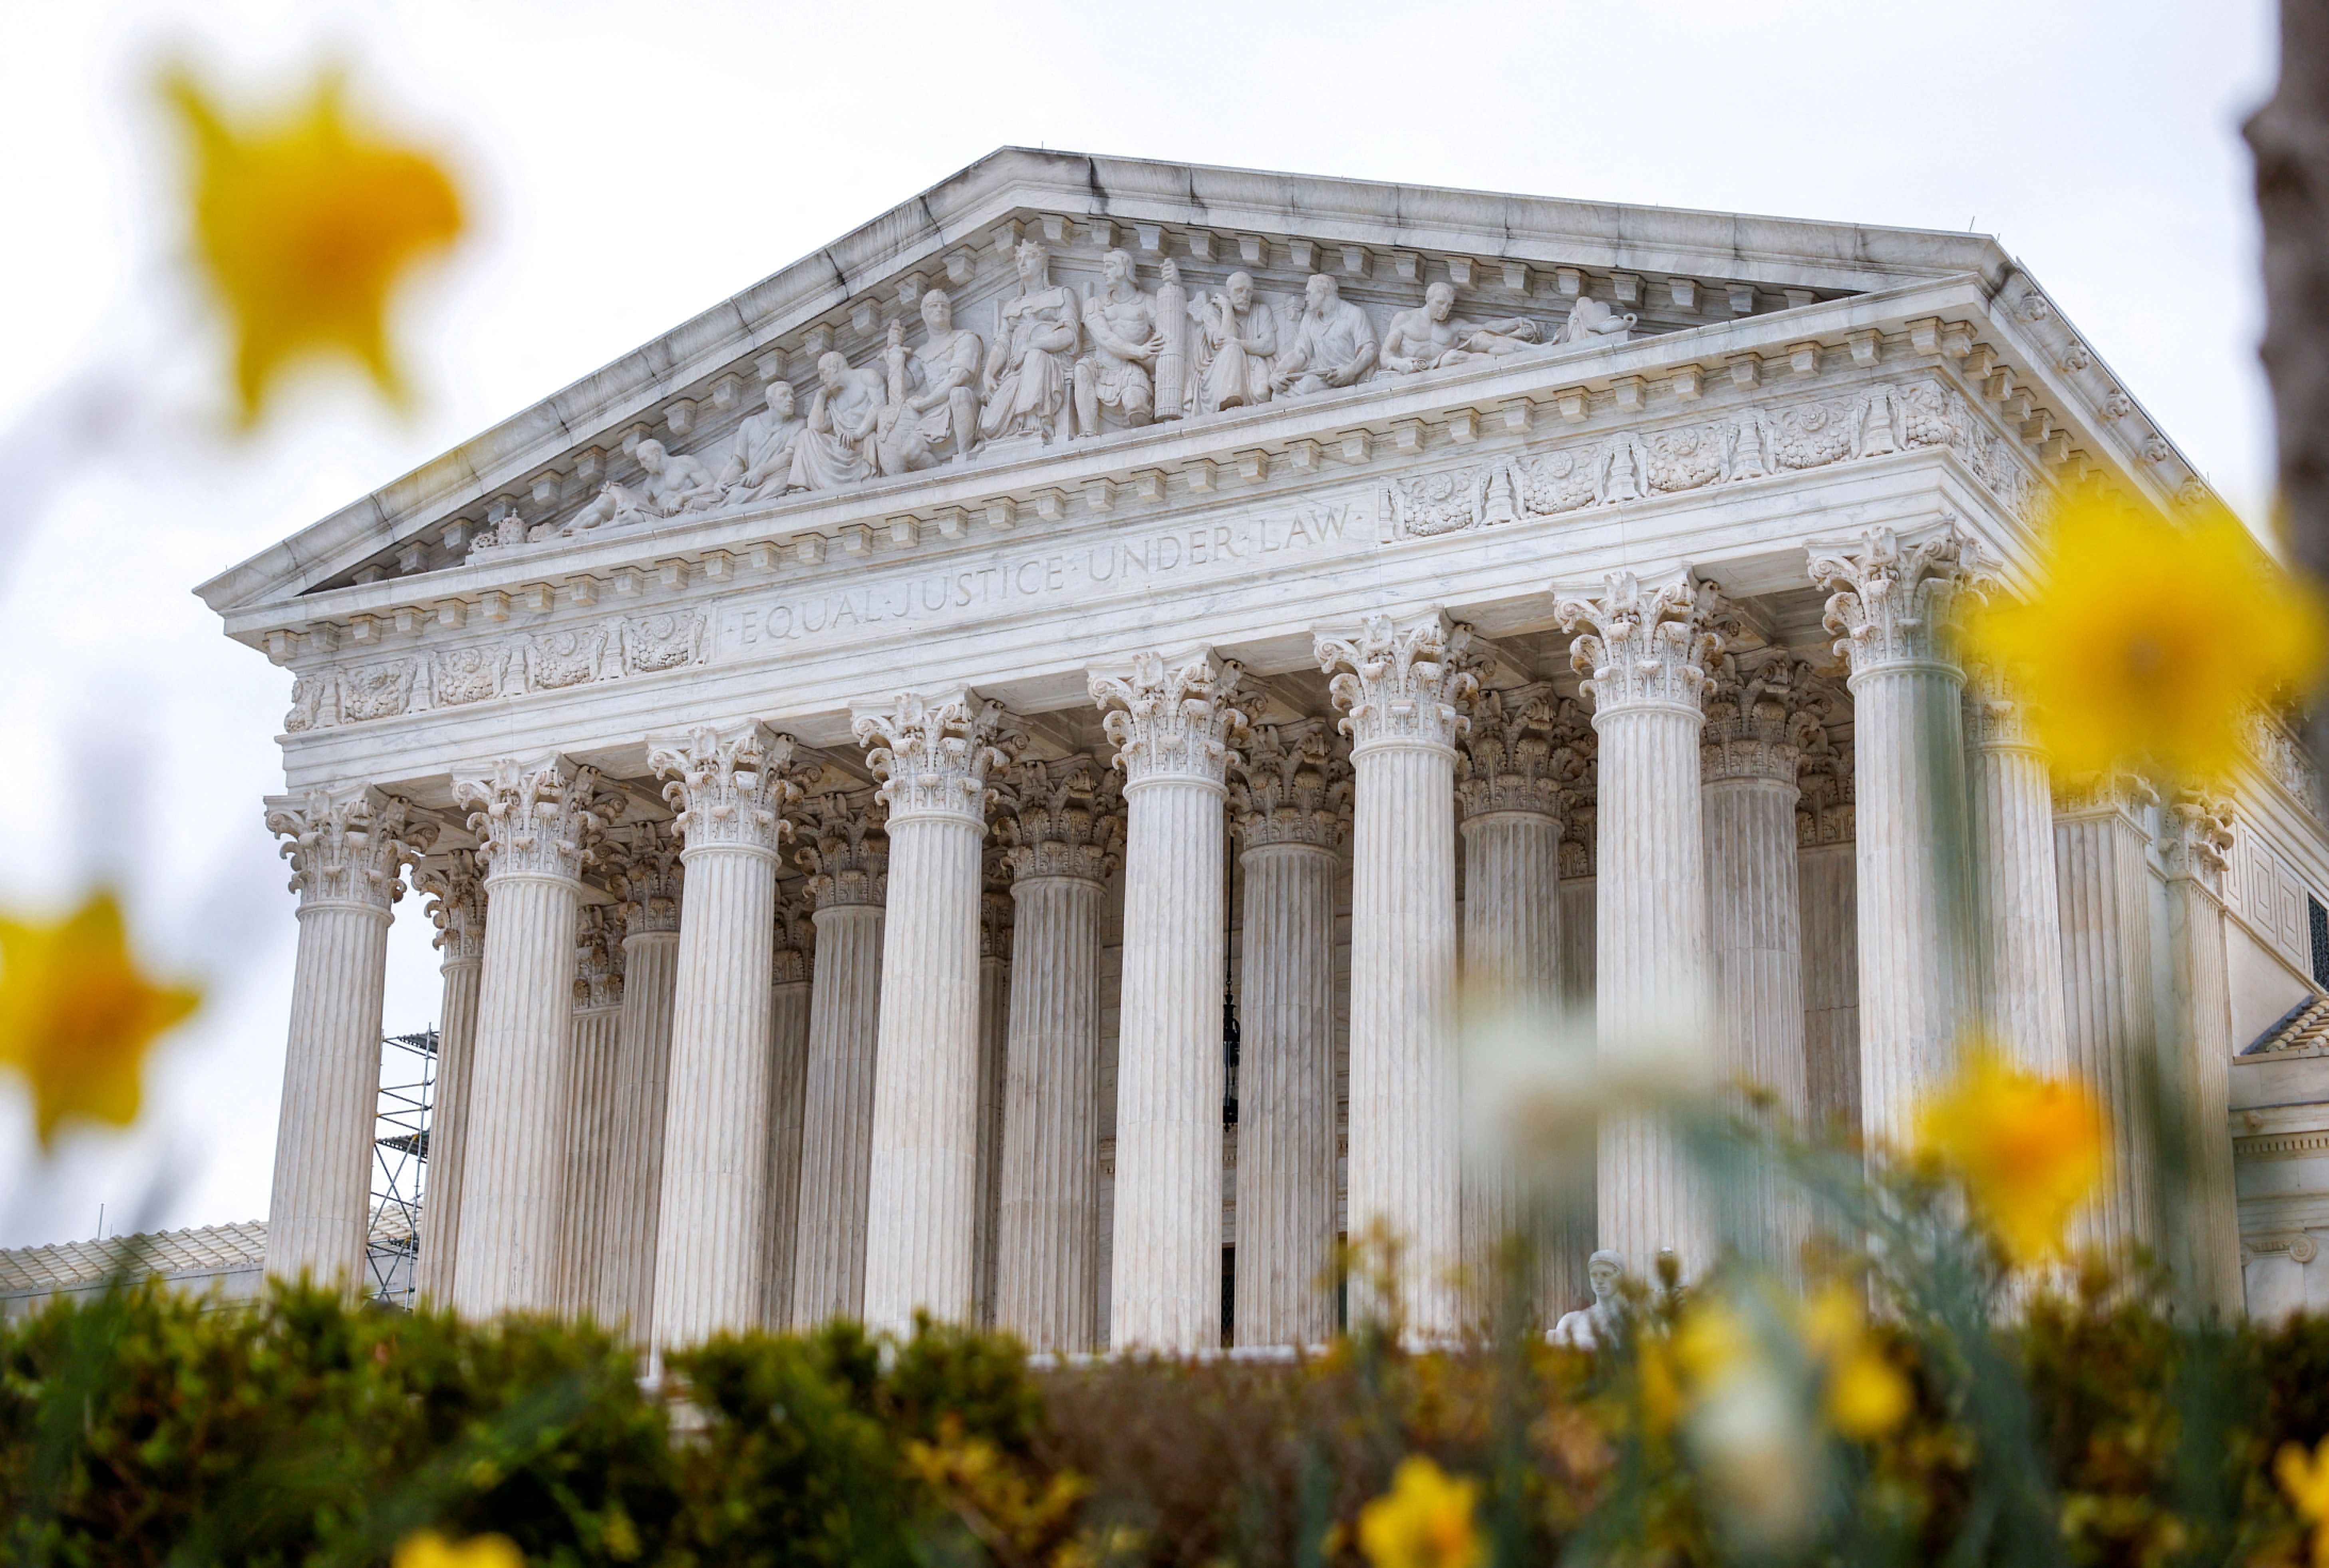 Ethics standards for the U.S. Supreme Court under scrutiny 